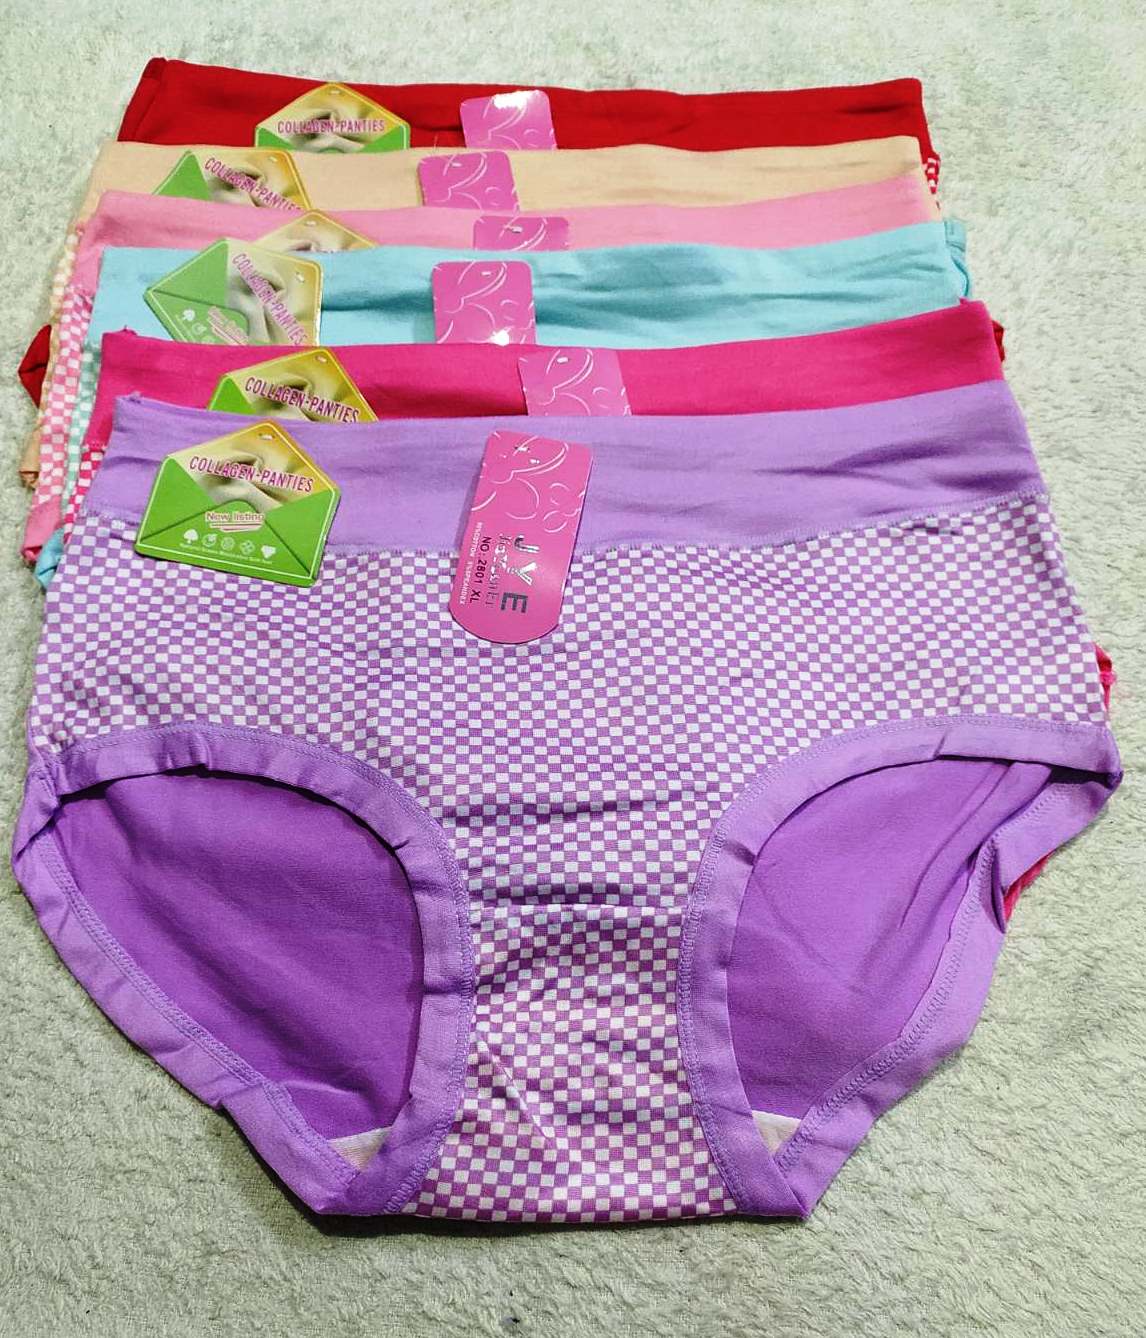 Bundle Of 6 Pieces XL Size Cotton Panties (Underwear) For Women (Best For  32 Inches To 36 Inches)